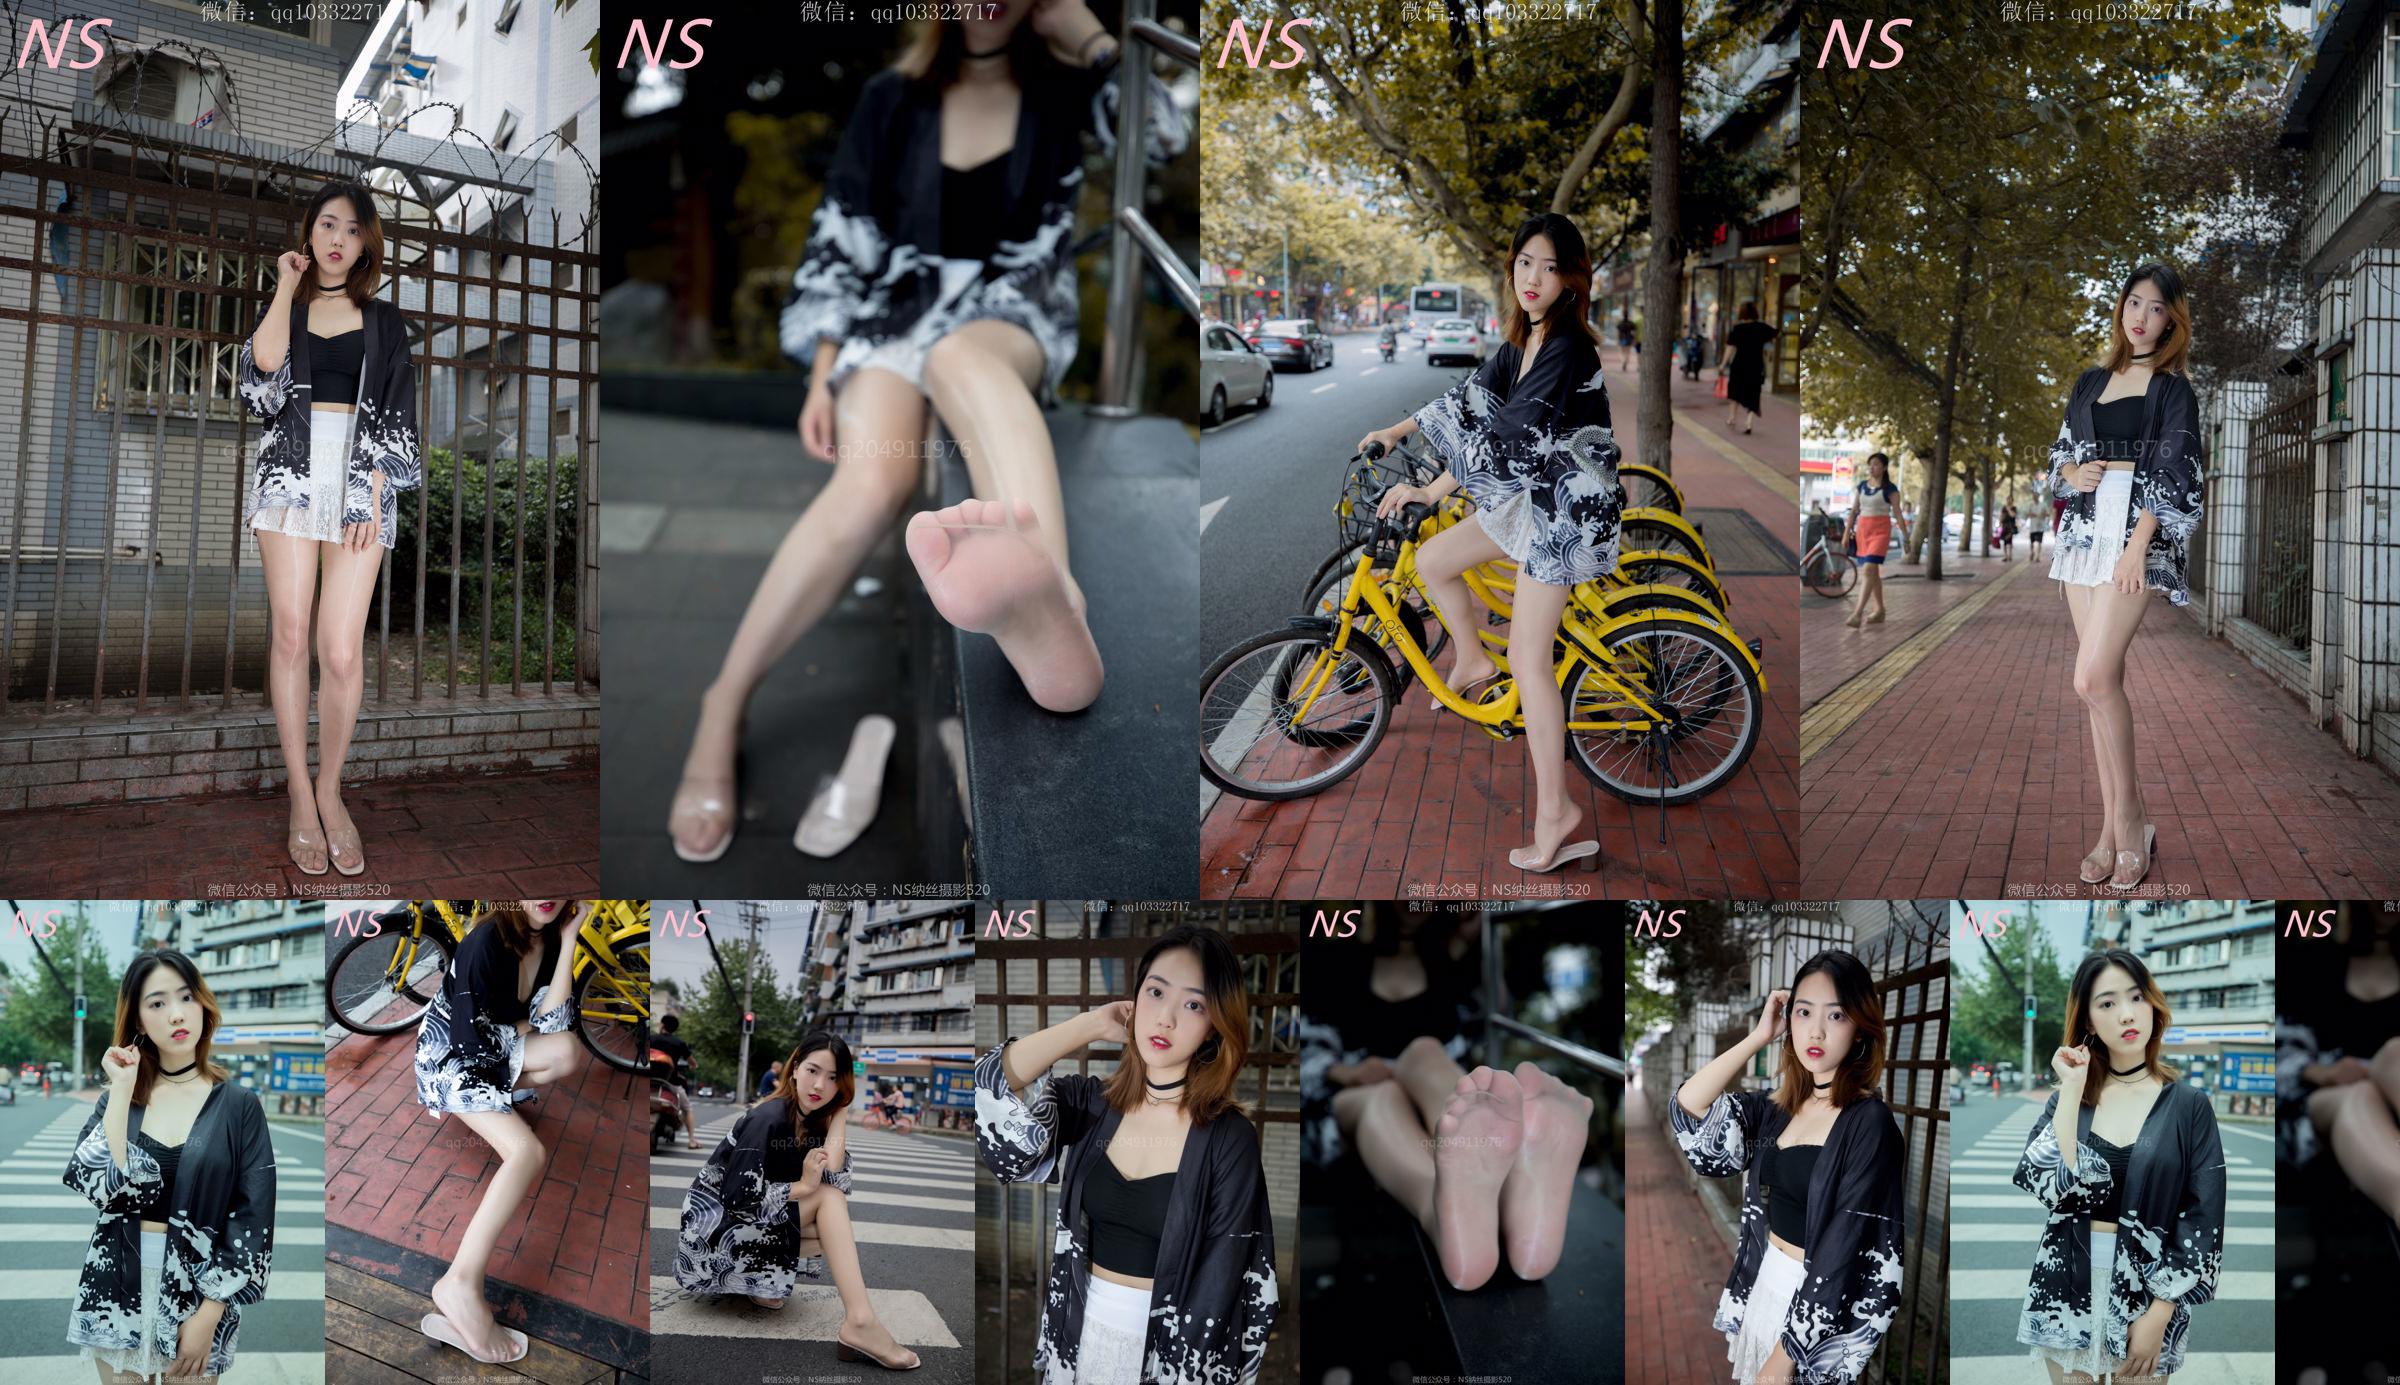 Man Wen "A Trip to a Tricycle in Flesh-colored Stockings and Beautiful Legs" [Nass Photography] No.9c7076 Page 39